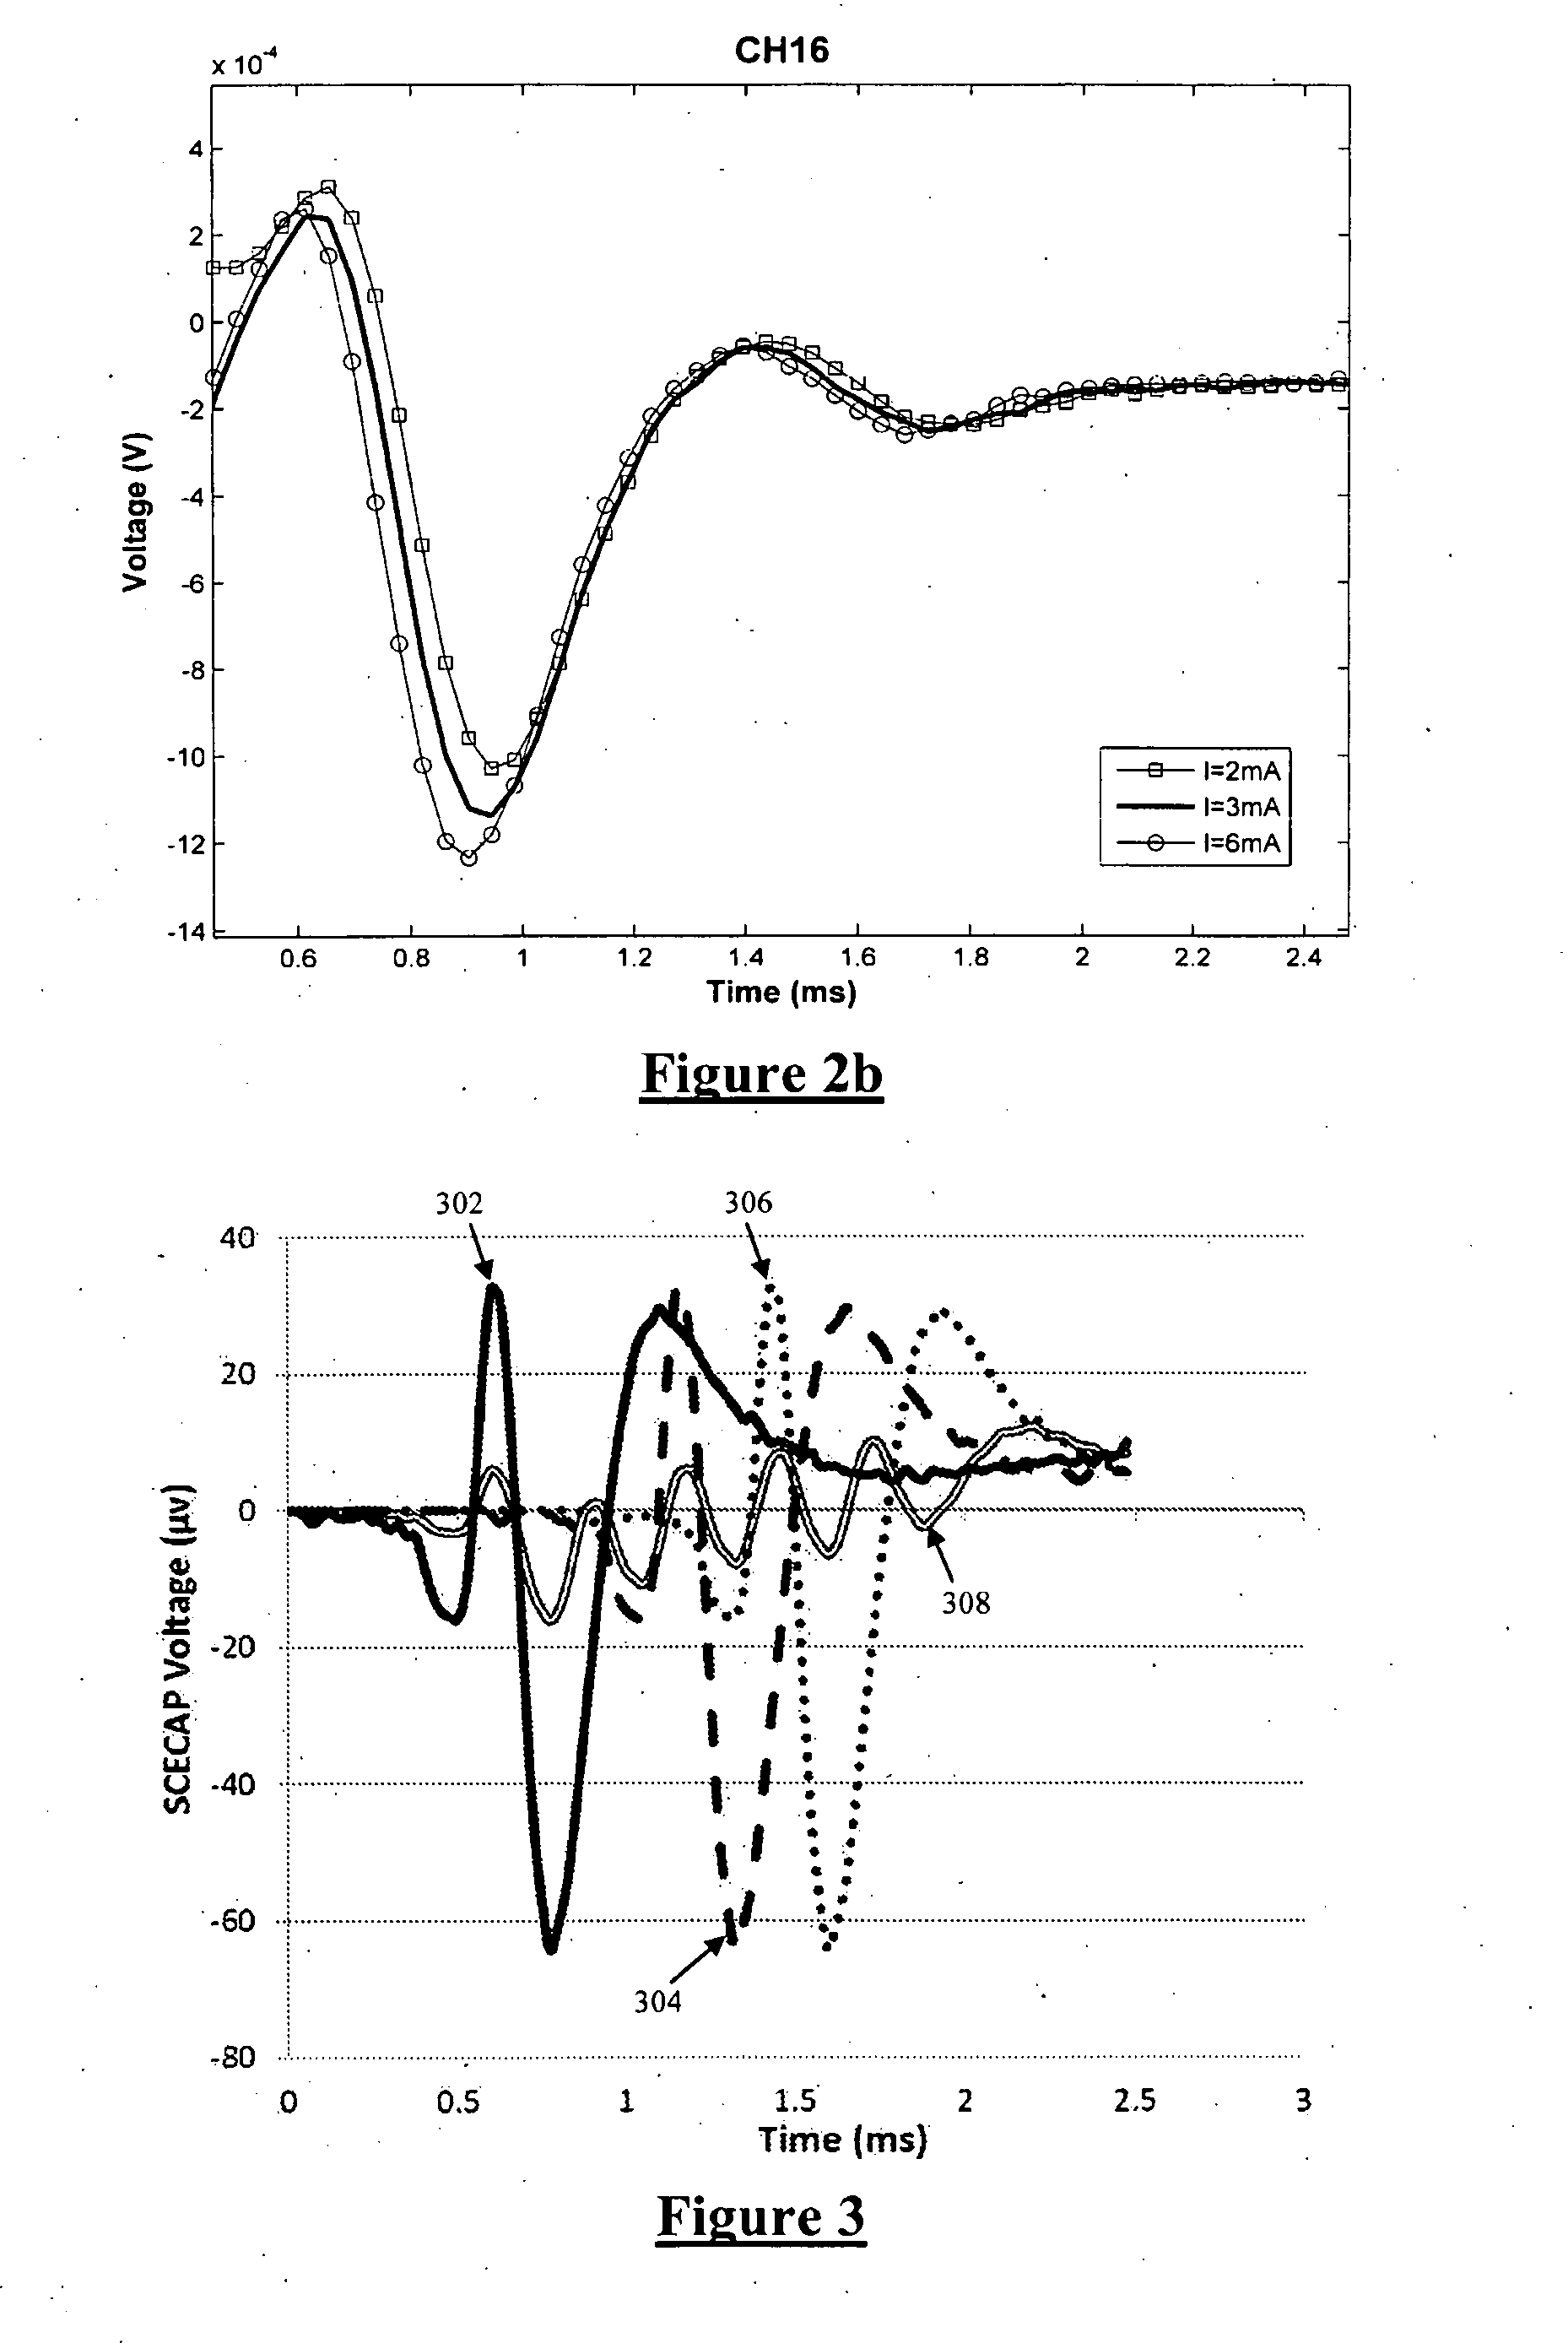 Method and apparatus for application of a neural stimulus